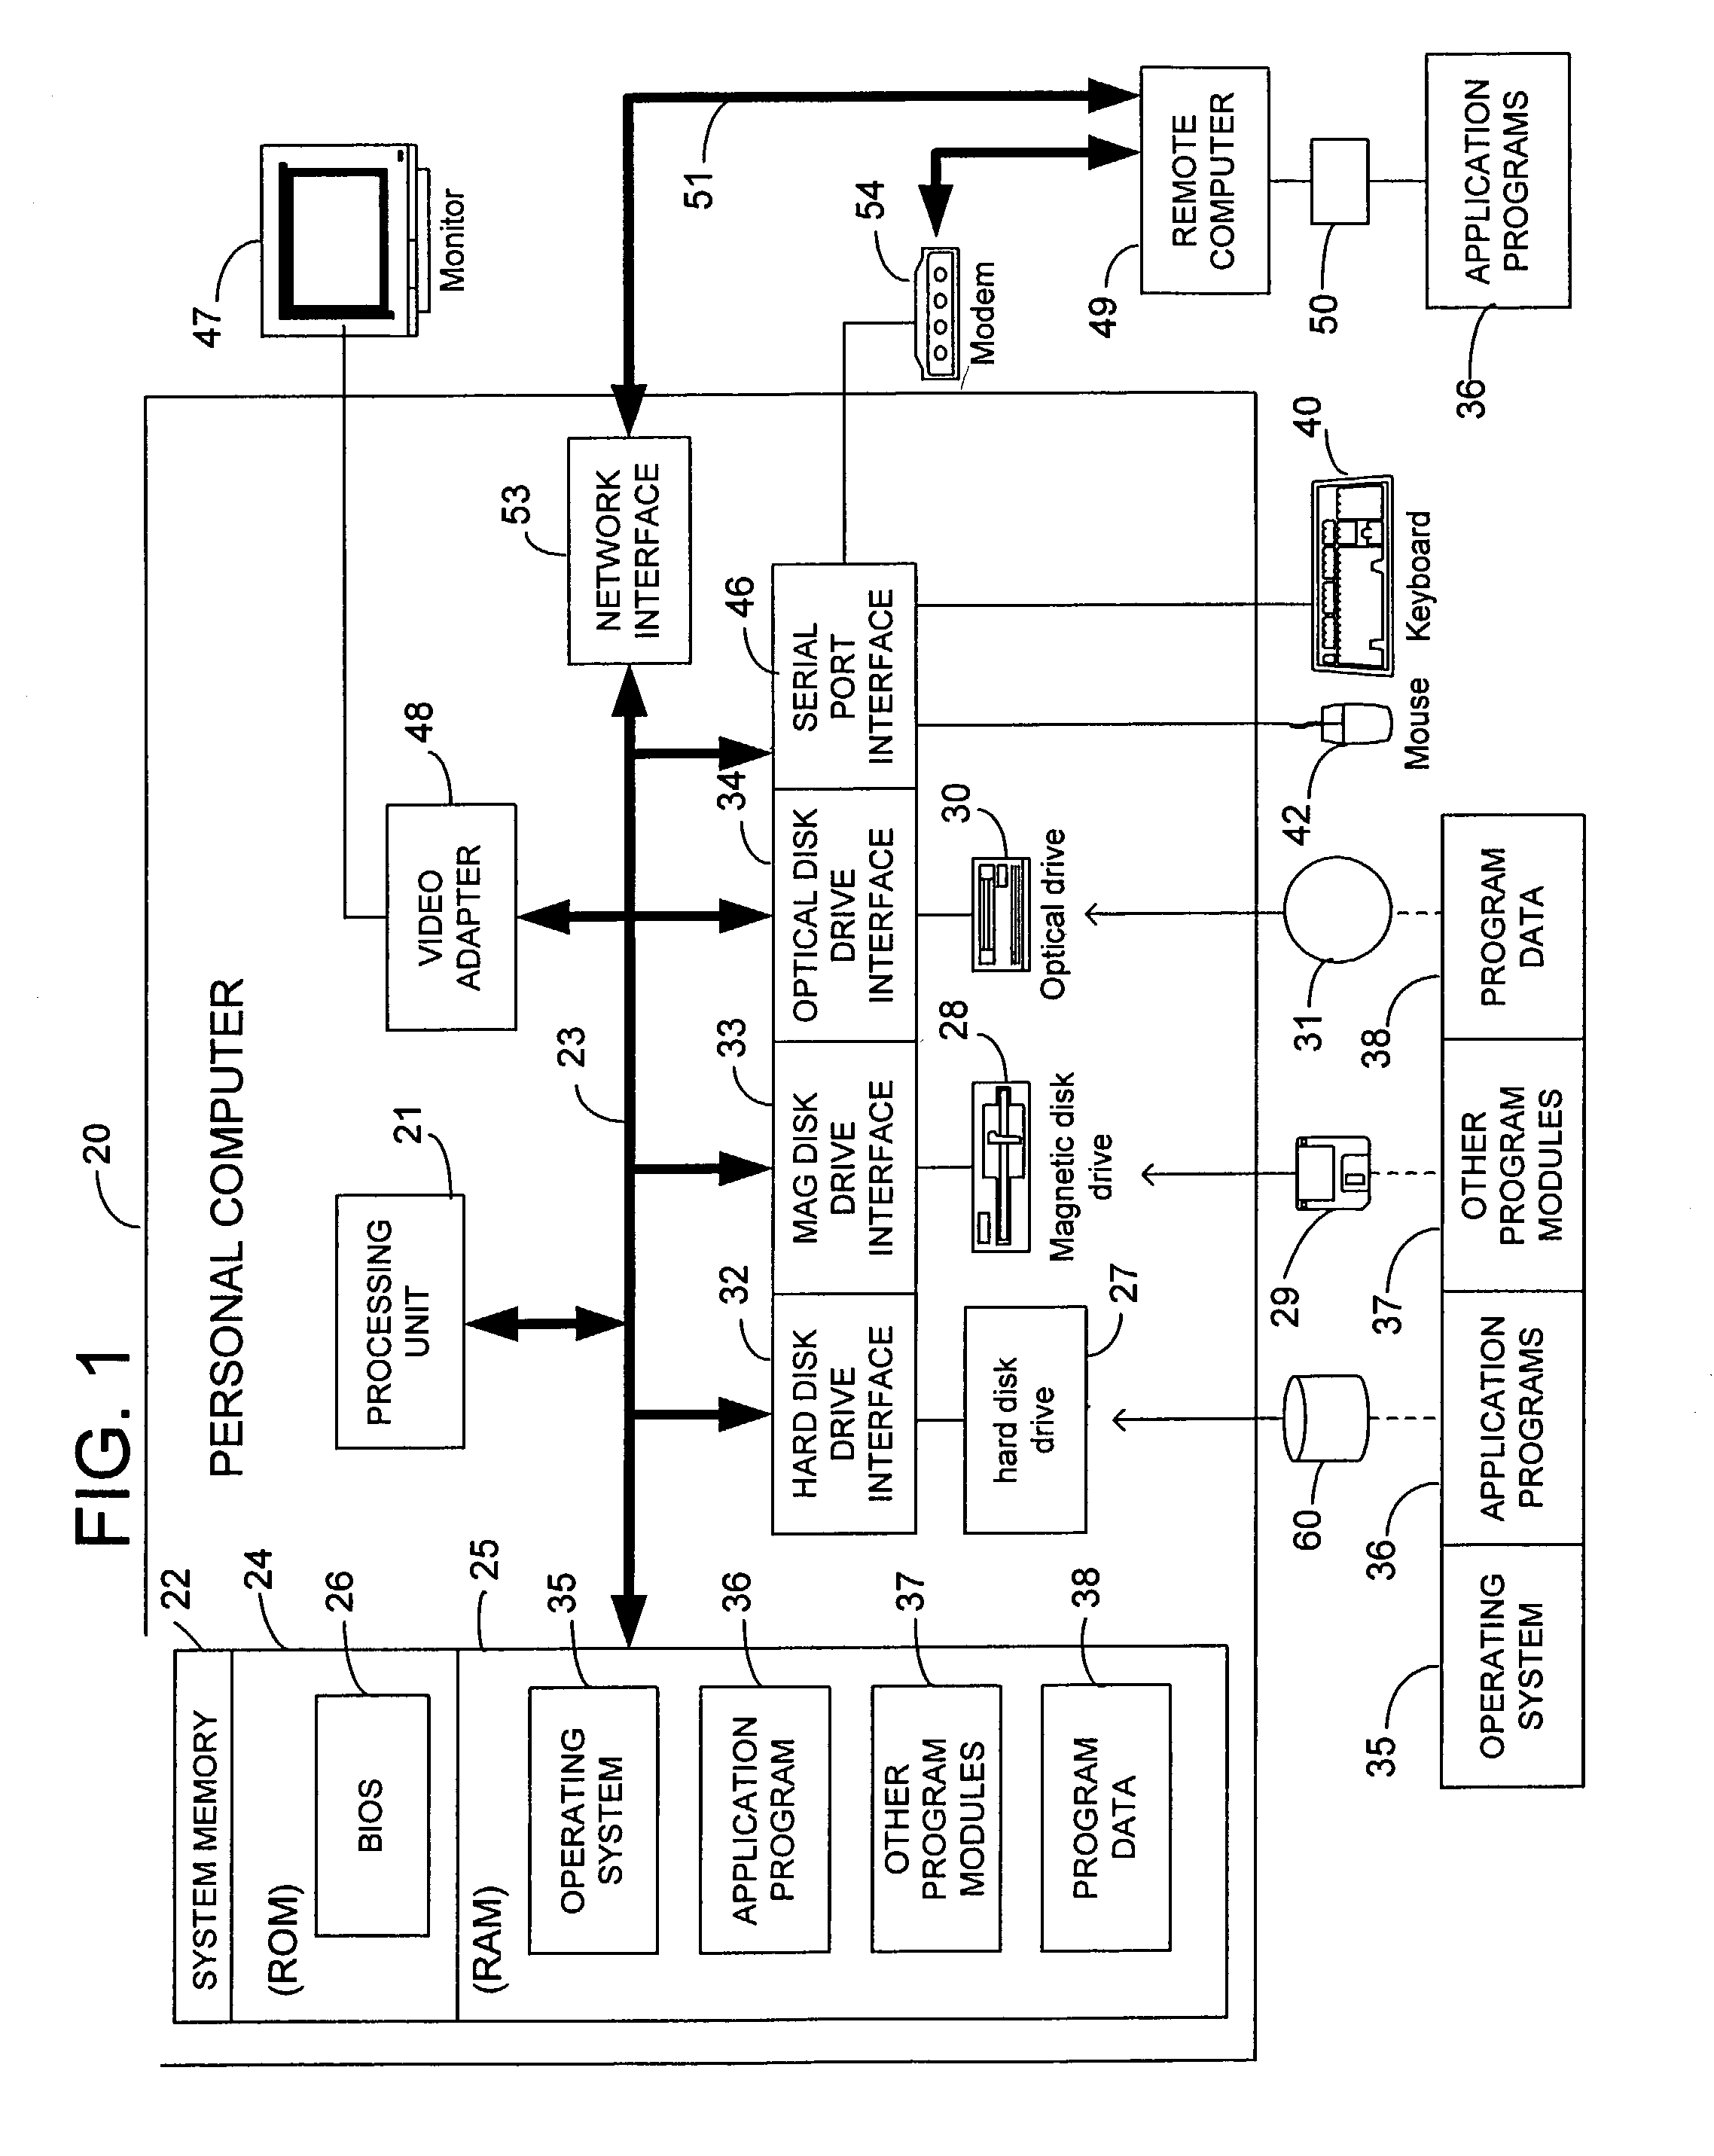 Network connection setup procedure for traffic admission control and implicit network bandwidth reservation